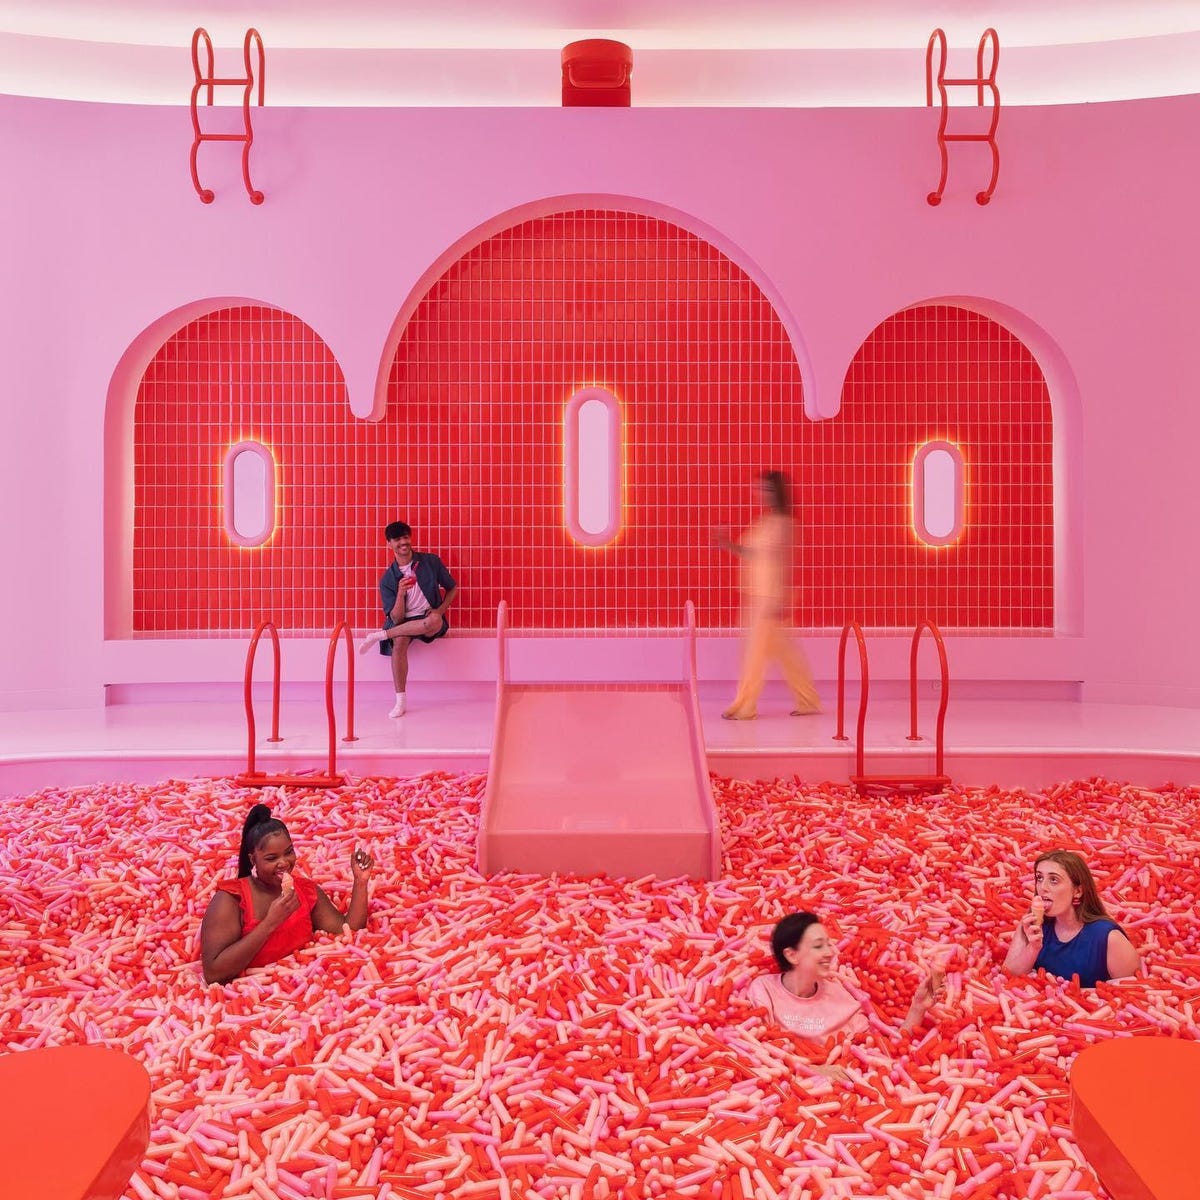 The Sprinkle pool at the Museum of Ice Cream